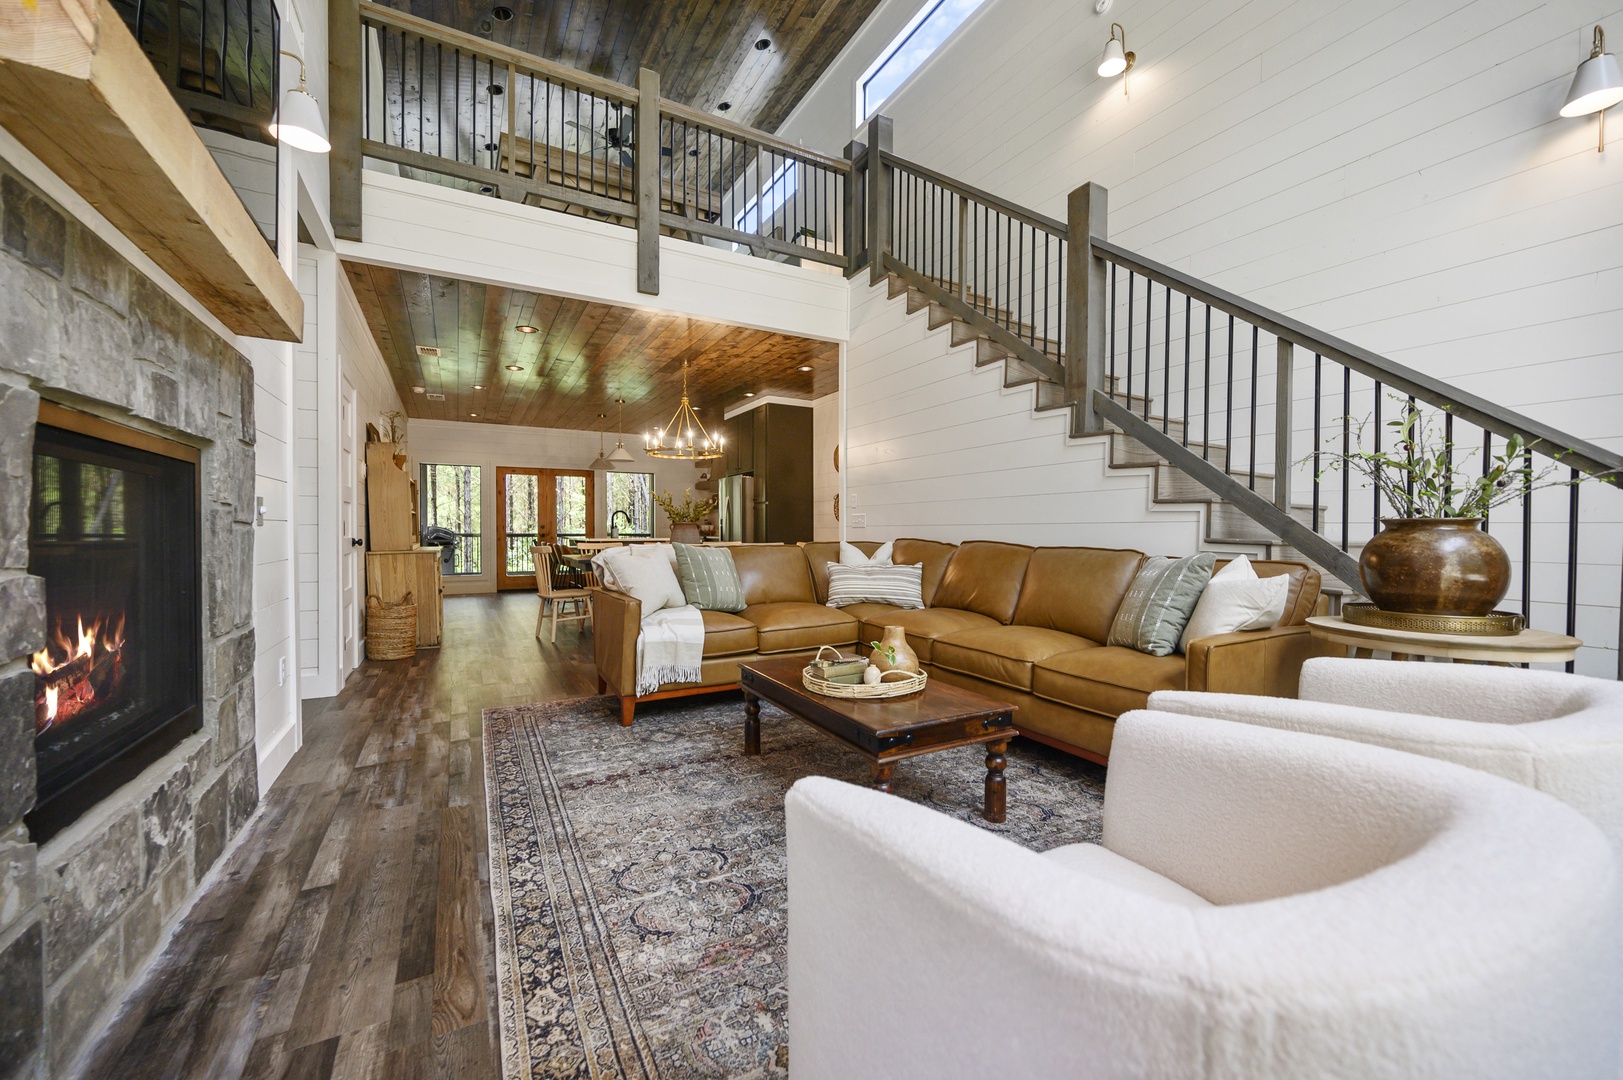 Spacious living room opens to upstairs loft space